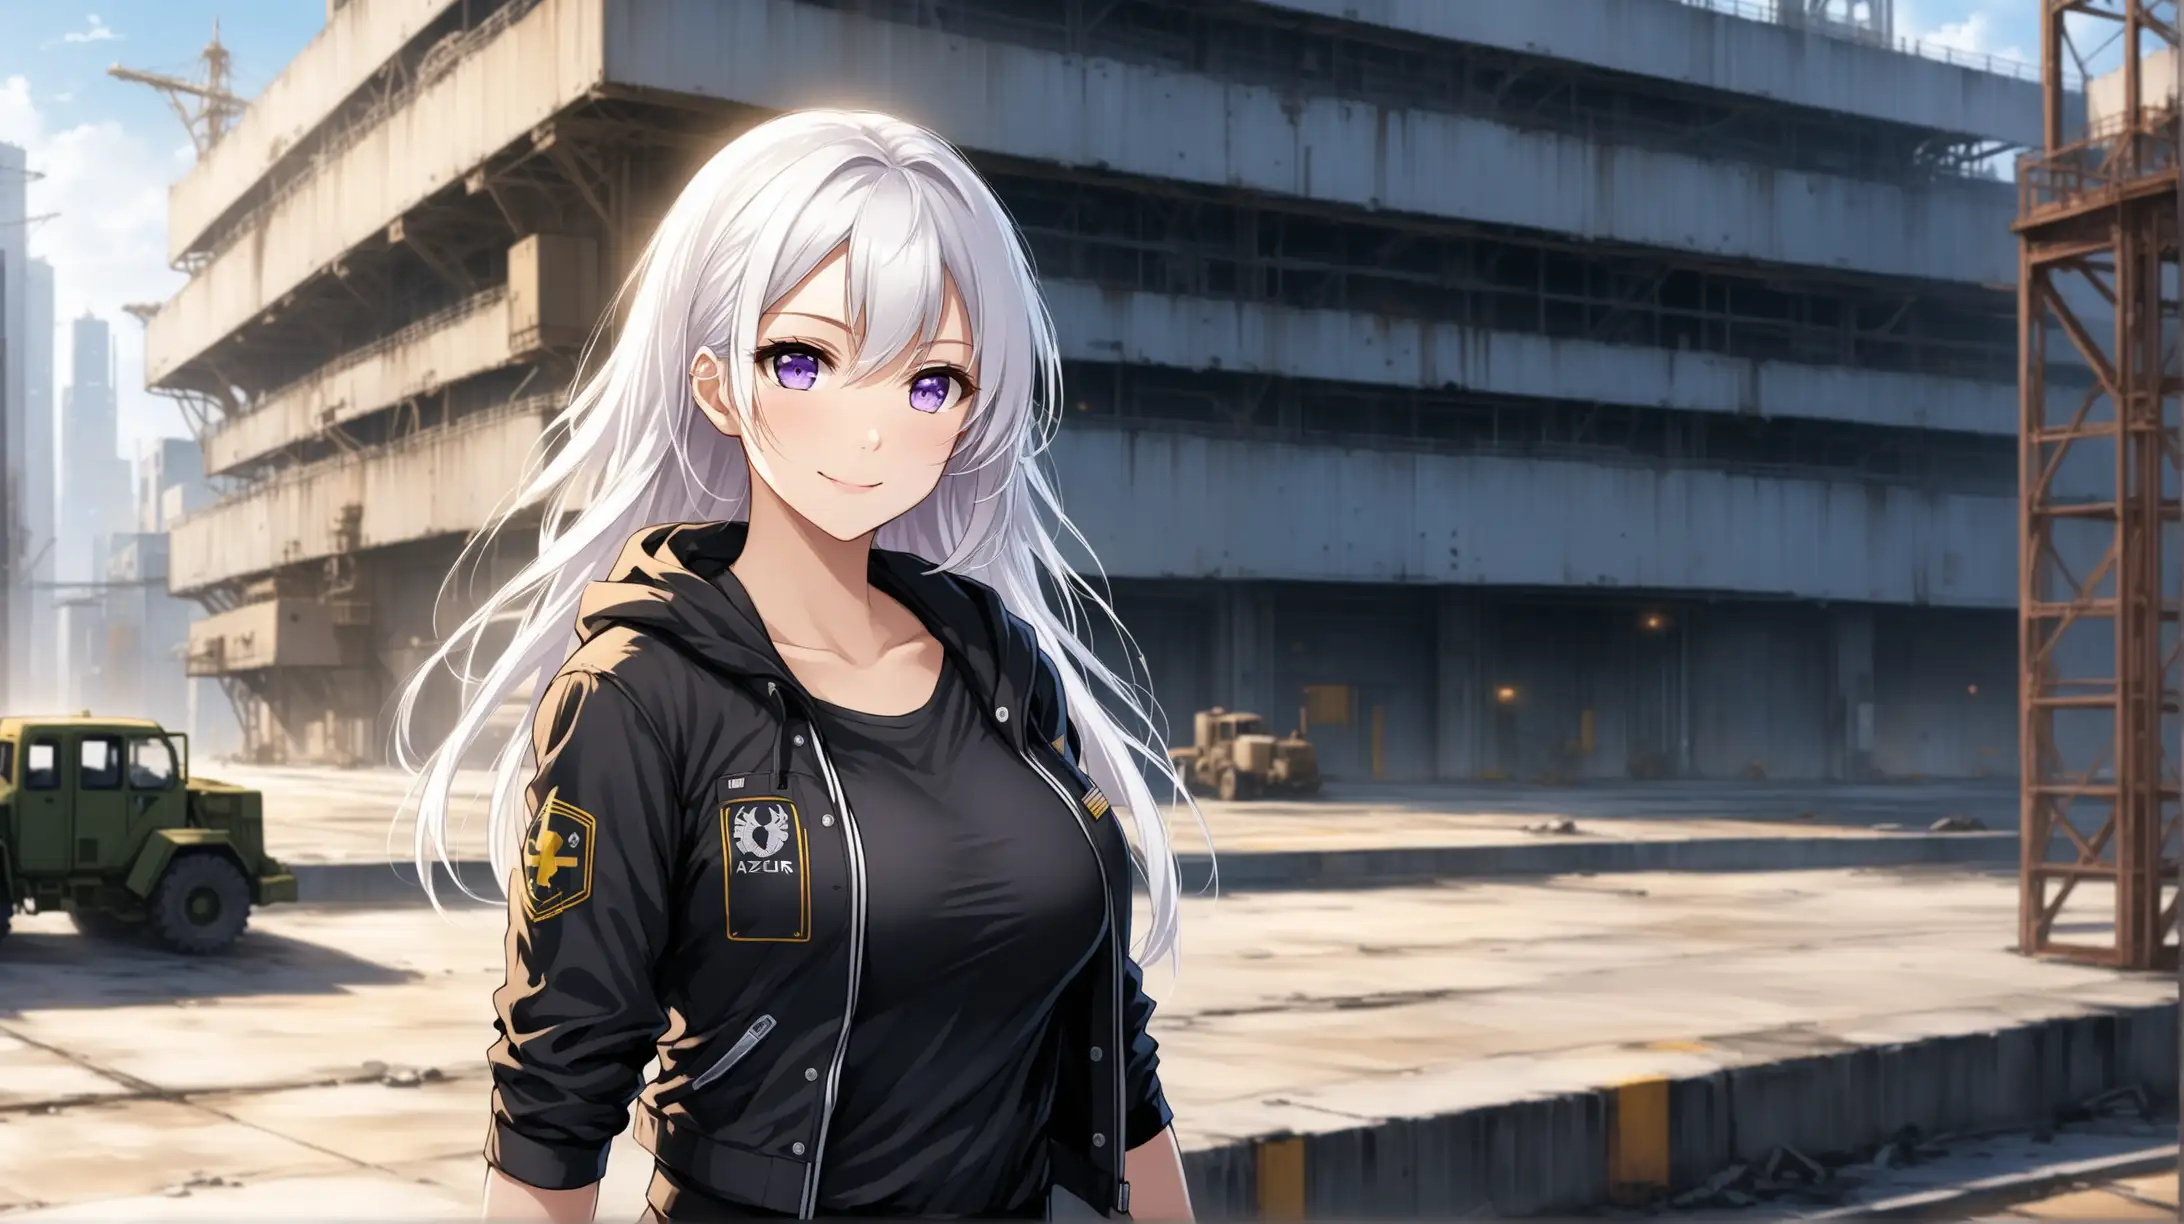 Draw the character Enterprise from Azur Lane, pale violet eyes, white hair, high quality, natural lighting, long shot, outdoors, casual pose, outfit inspired from the Fallout series, urban setting, smiling at the viewer